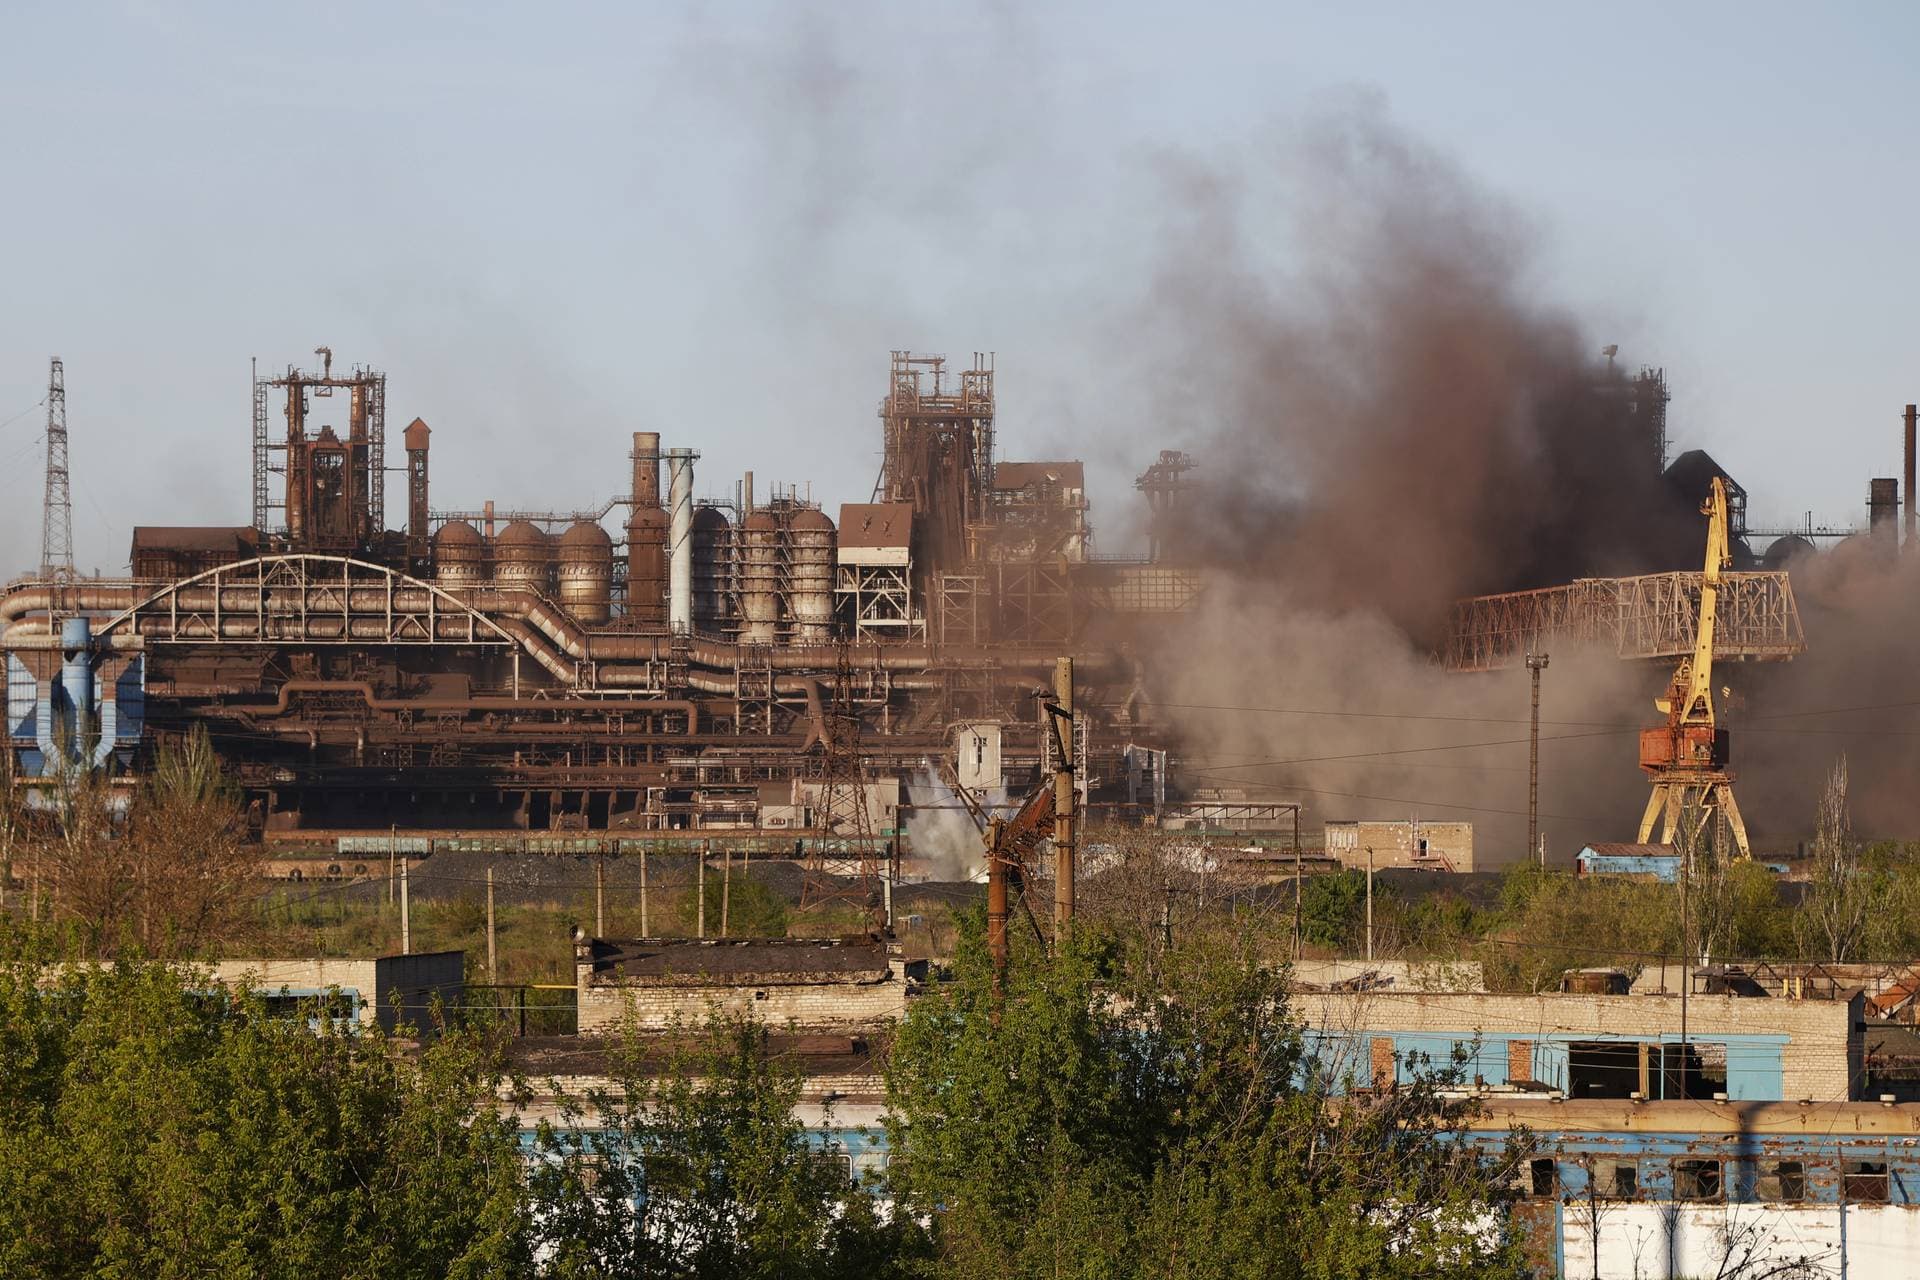 Smoke rises from the Metallurgical Combine Azovstal in Mariupol during shelling, in Mariupol